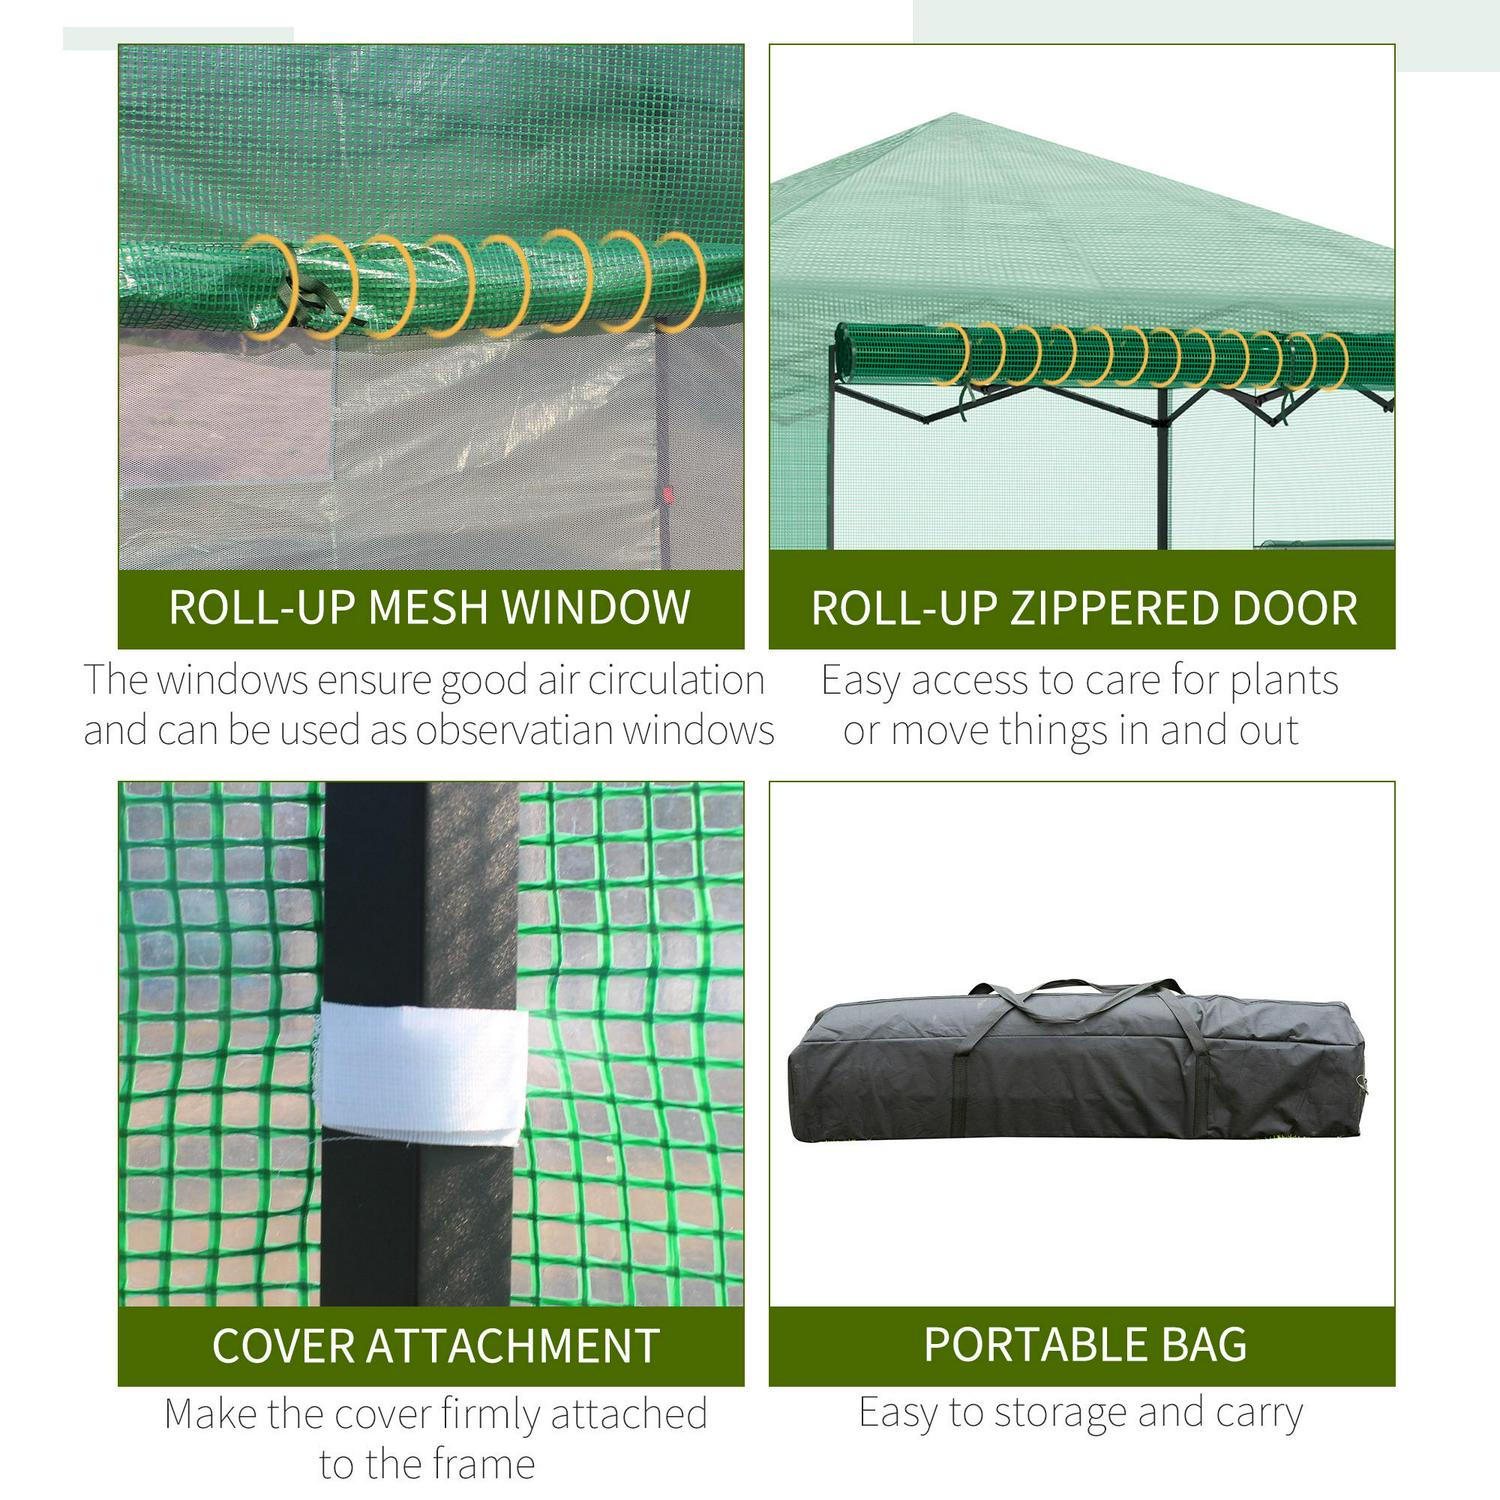 Portable Walk In Greenhouse With Roll-up Door Windows Outdoor Foldable (2 X 2 X 2)m